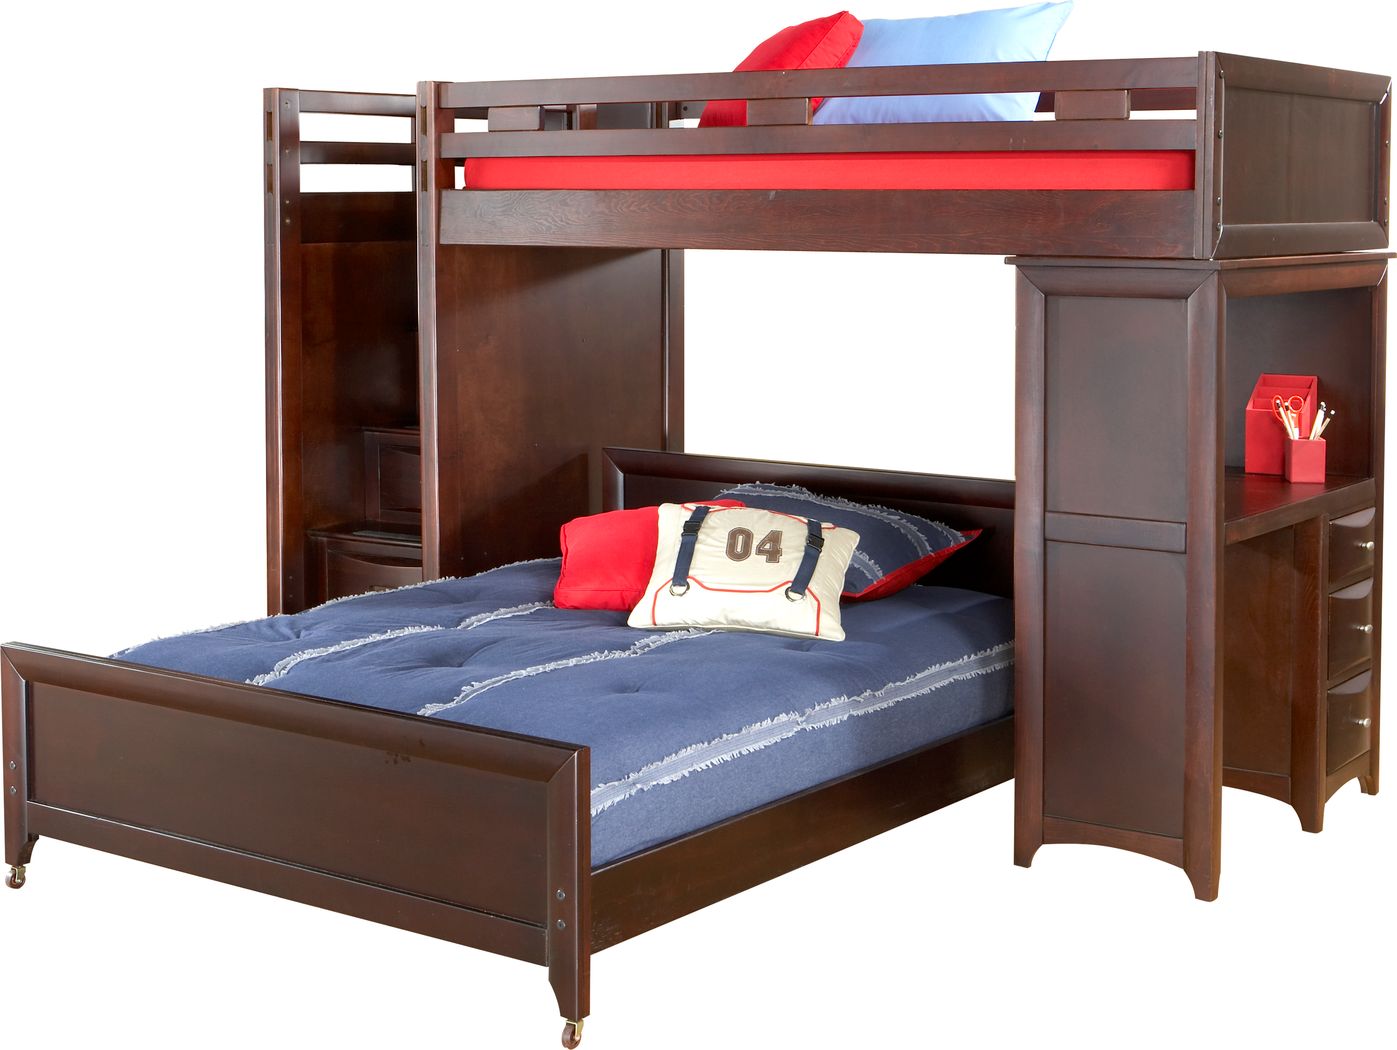 rooms to go ivy league bunk bed